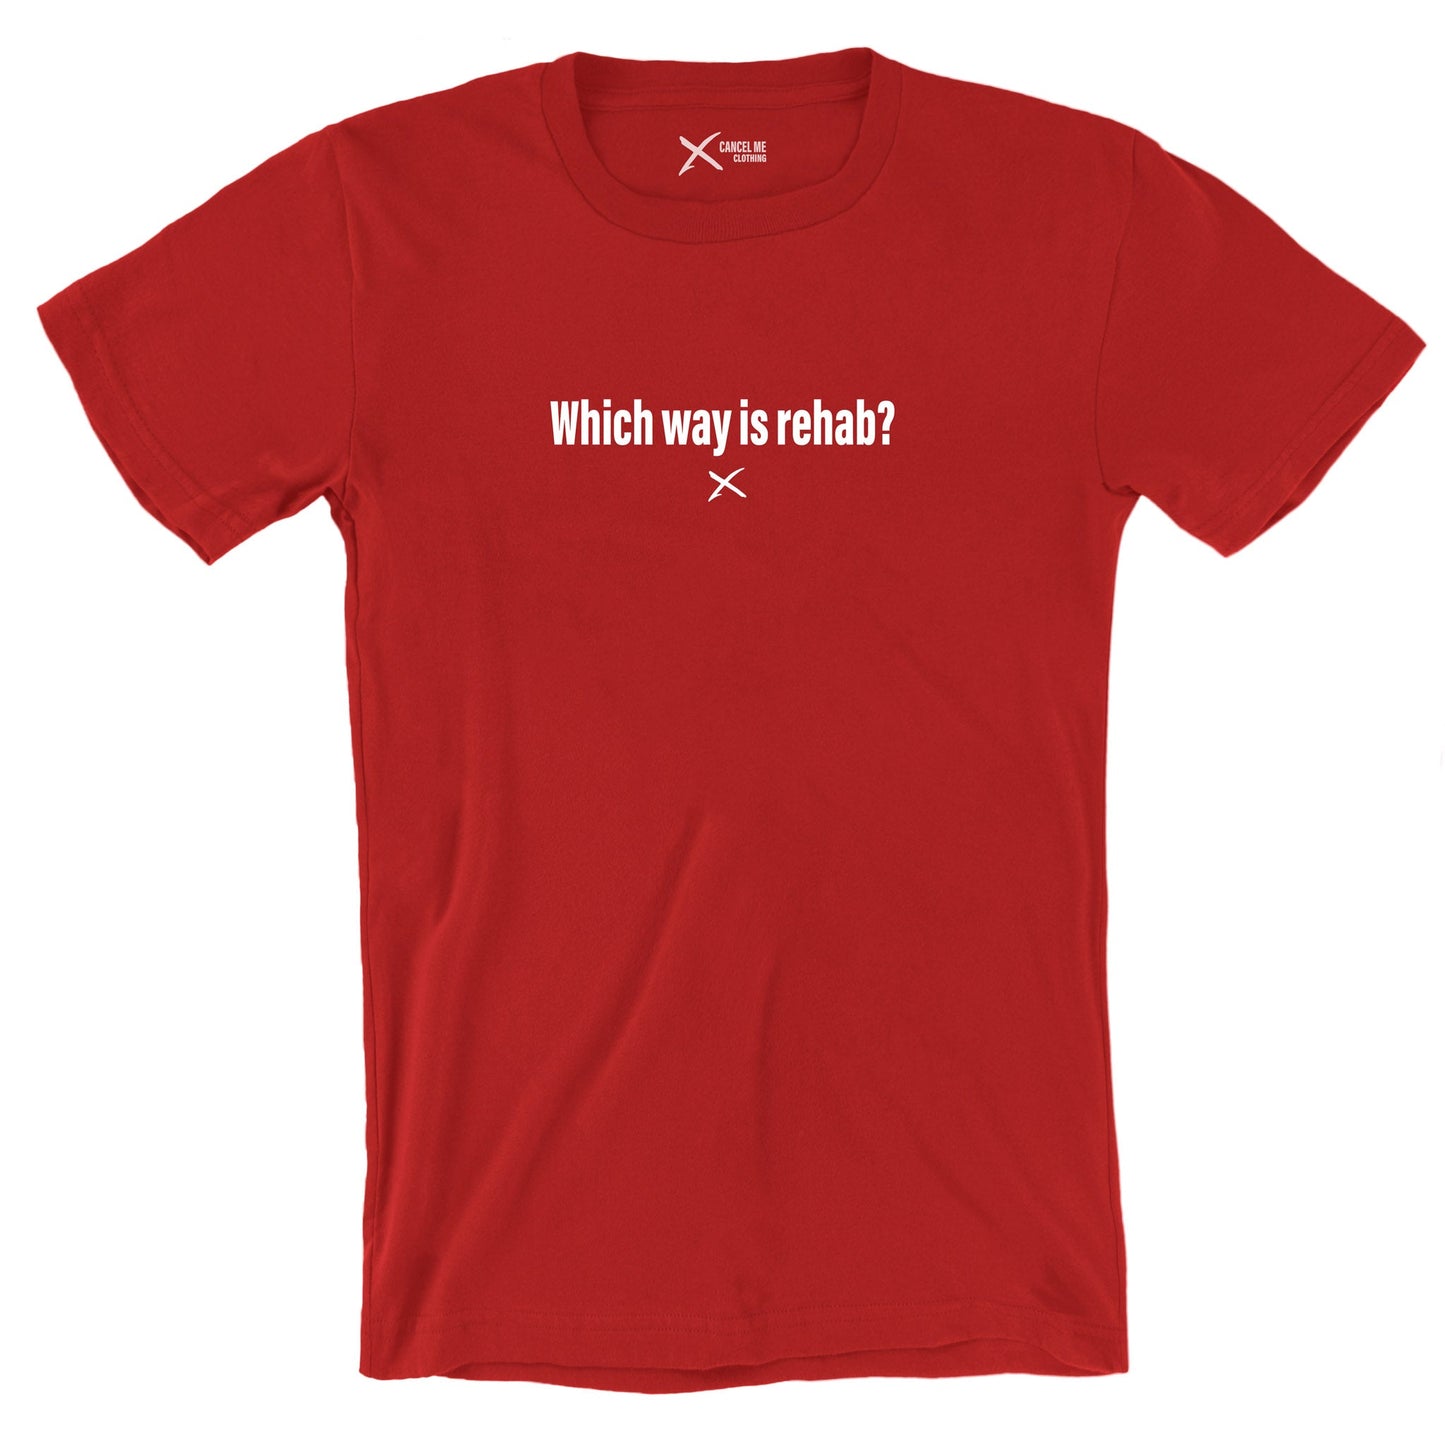 Which way is rehab? - Shirt